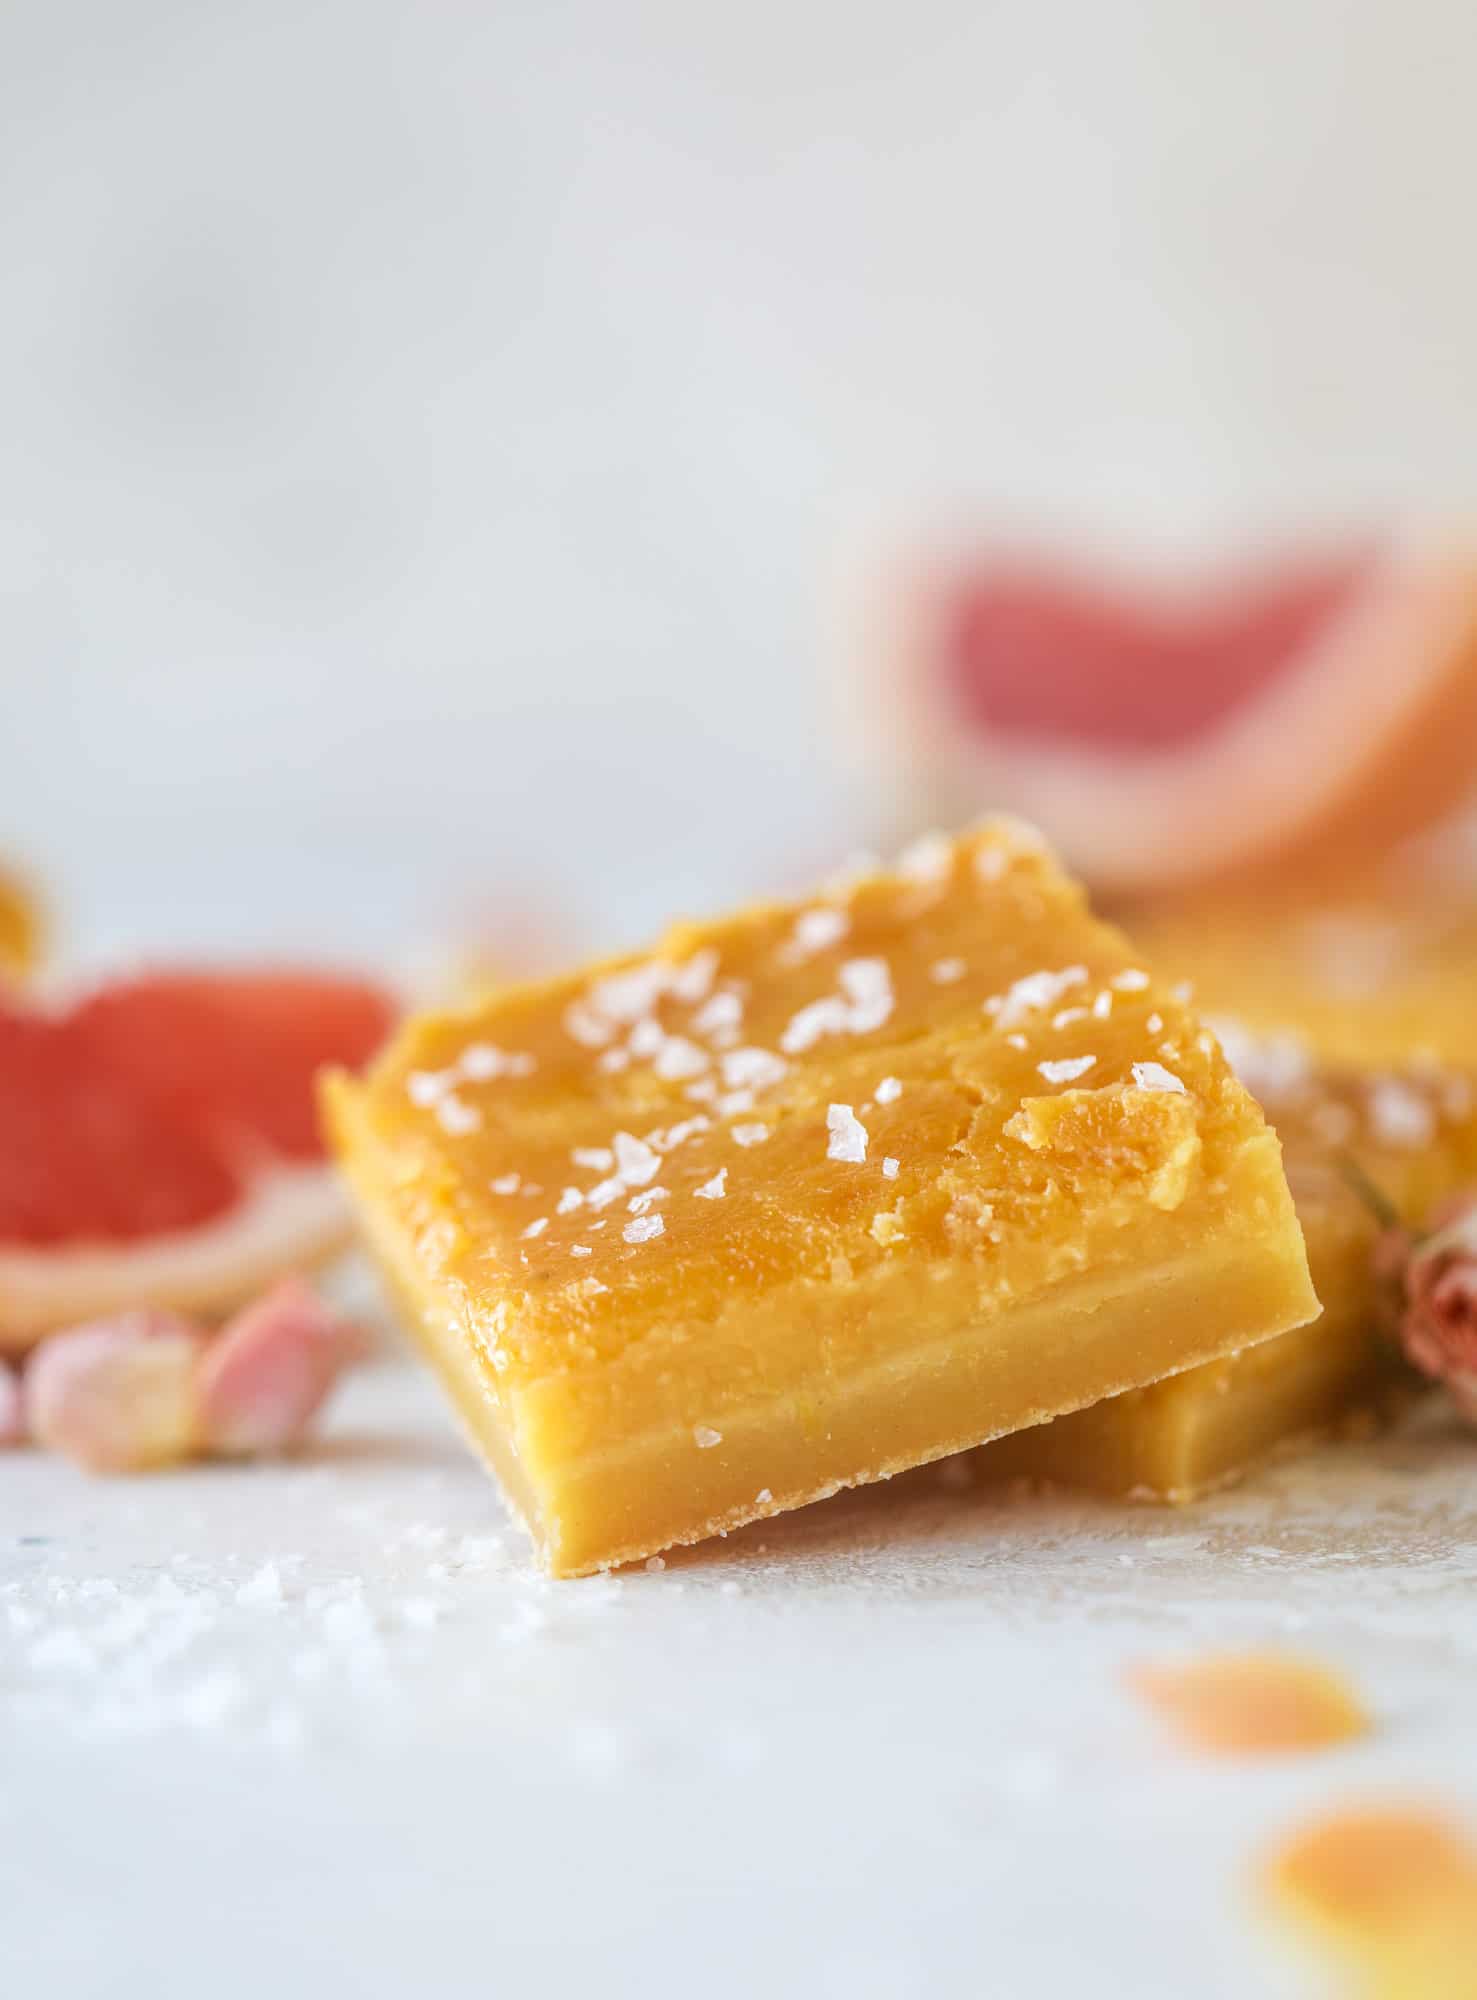 These salted citrus bars are made of both grapefruit and lemon curd on a buttery shortbread crust. Top with flaked sea salt for the perfect bite!